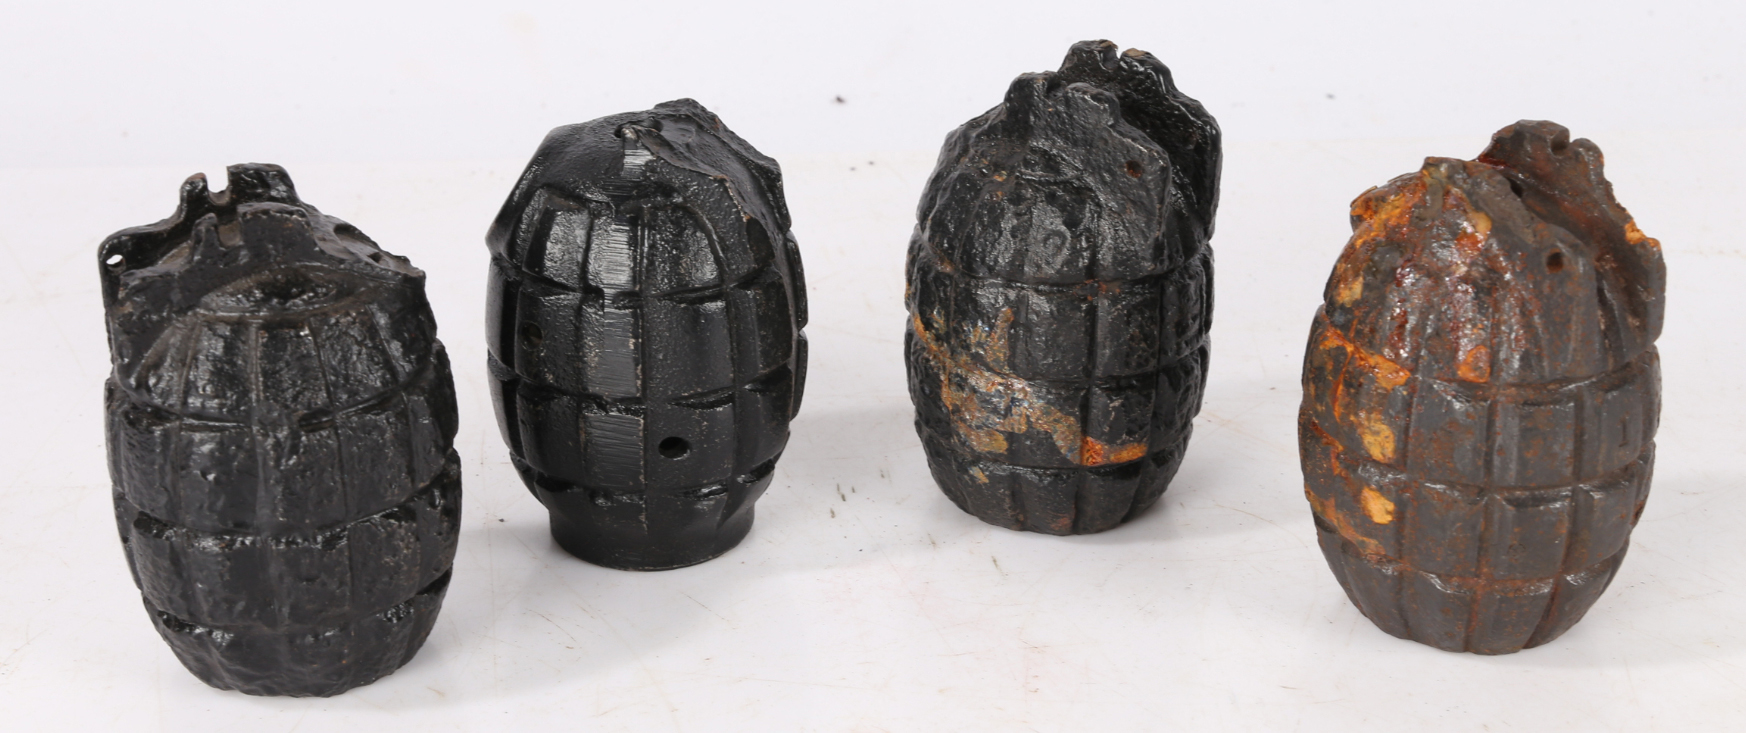 Four First World War British Mills Grenade casings, no safety levers, pins or base plugs, inert, (